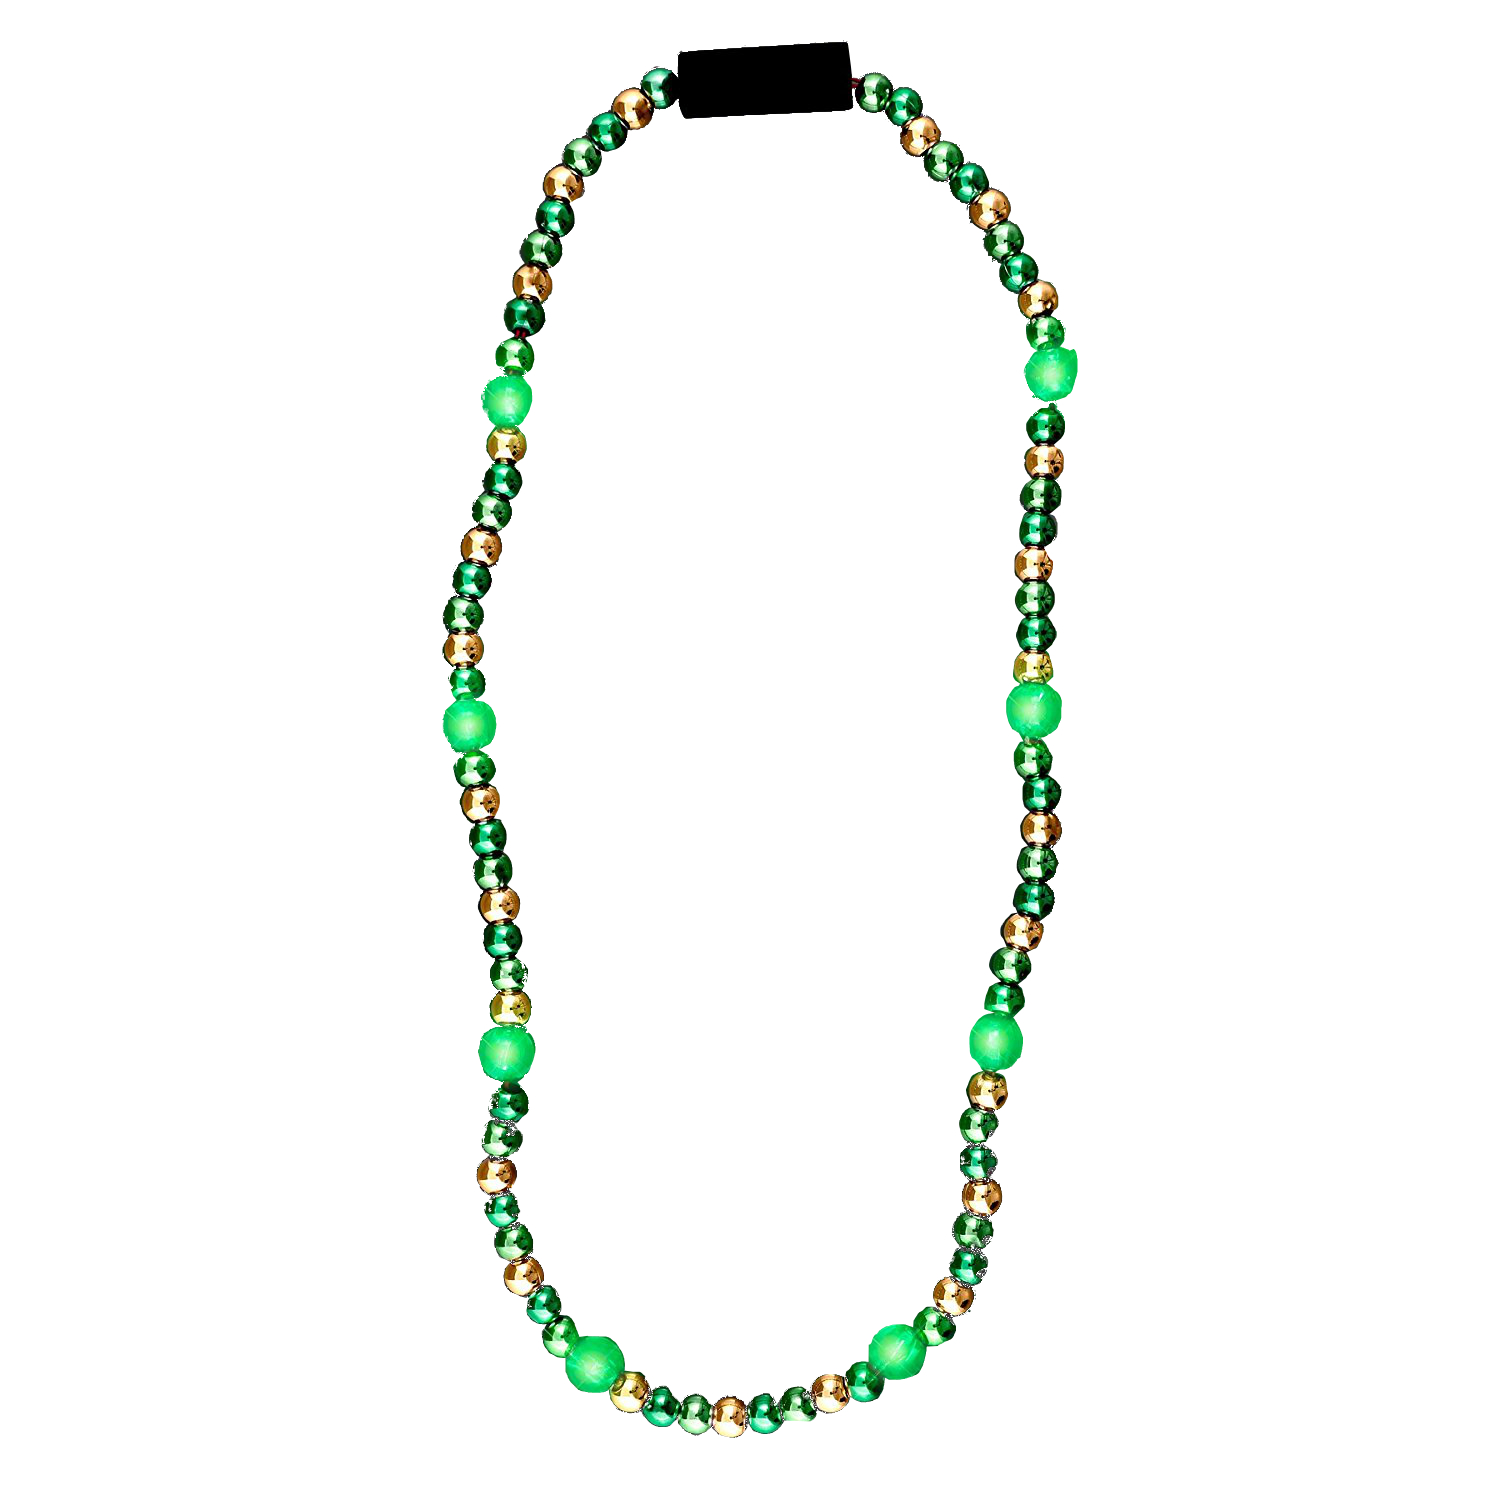 LED Necklace with Green and Gold Metallic Beads for St Patricks Day All Products 3